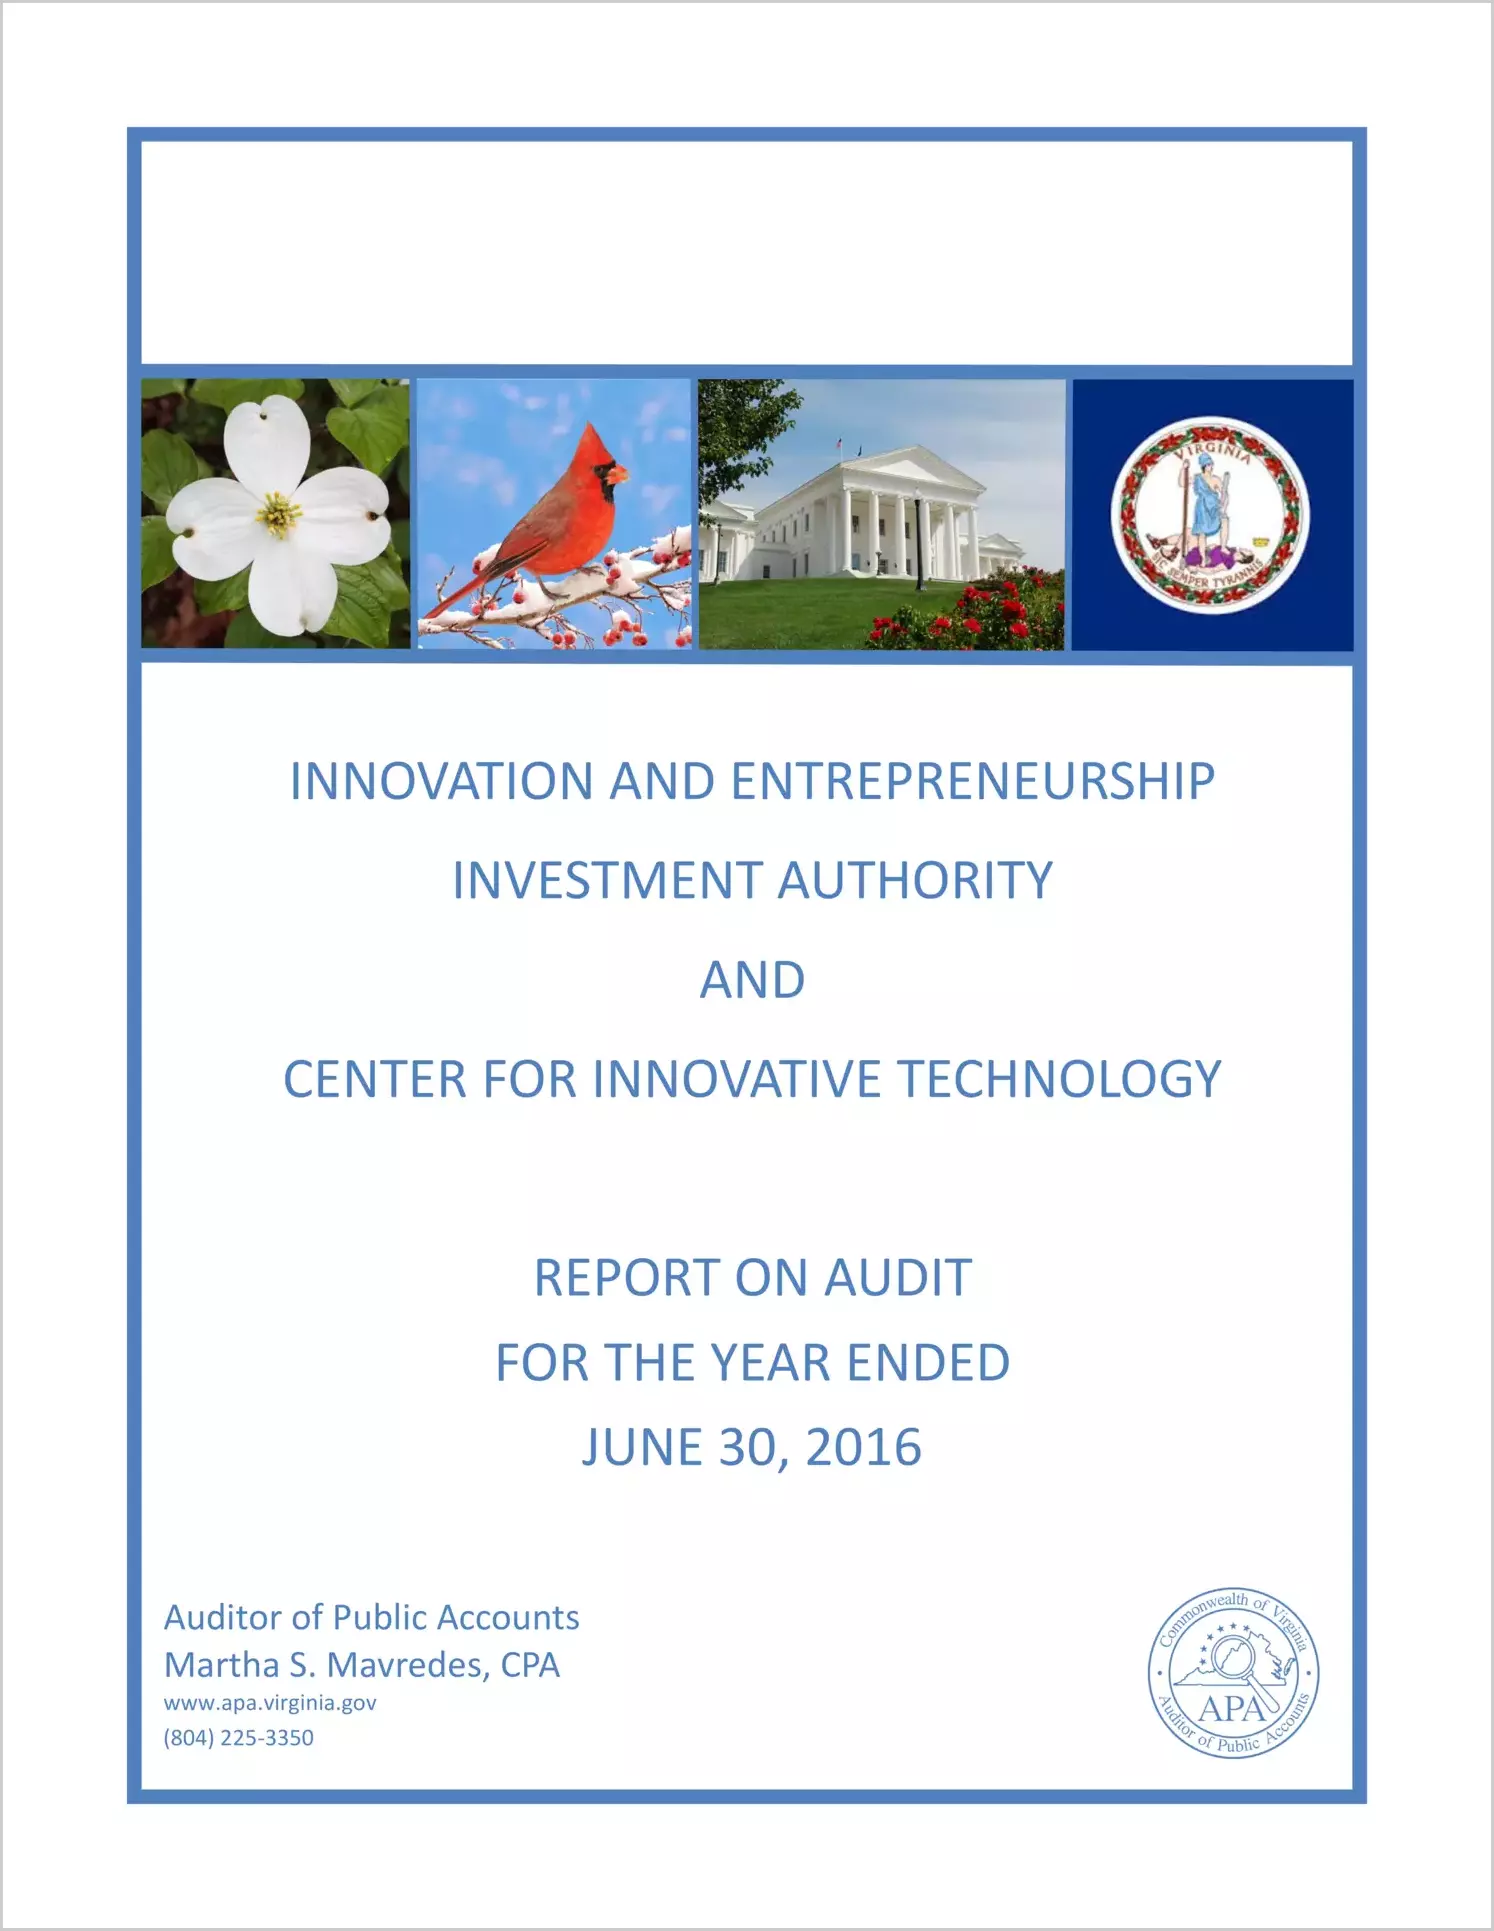 Innovation and Entrepreneurship Investment Authority and Center for Innovative Technology for the year ended June 30, 2016